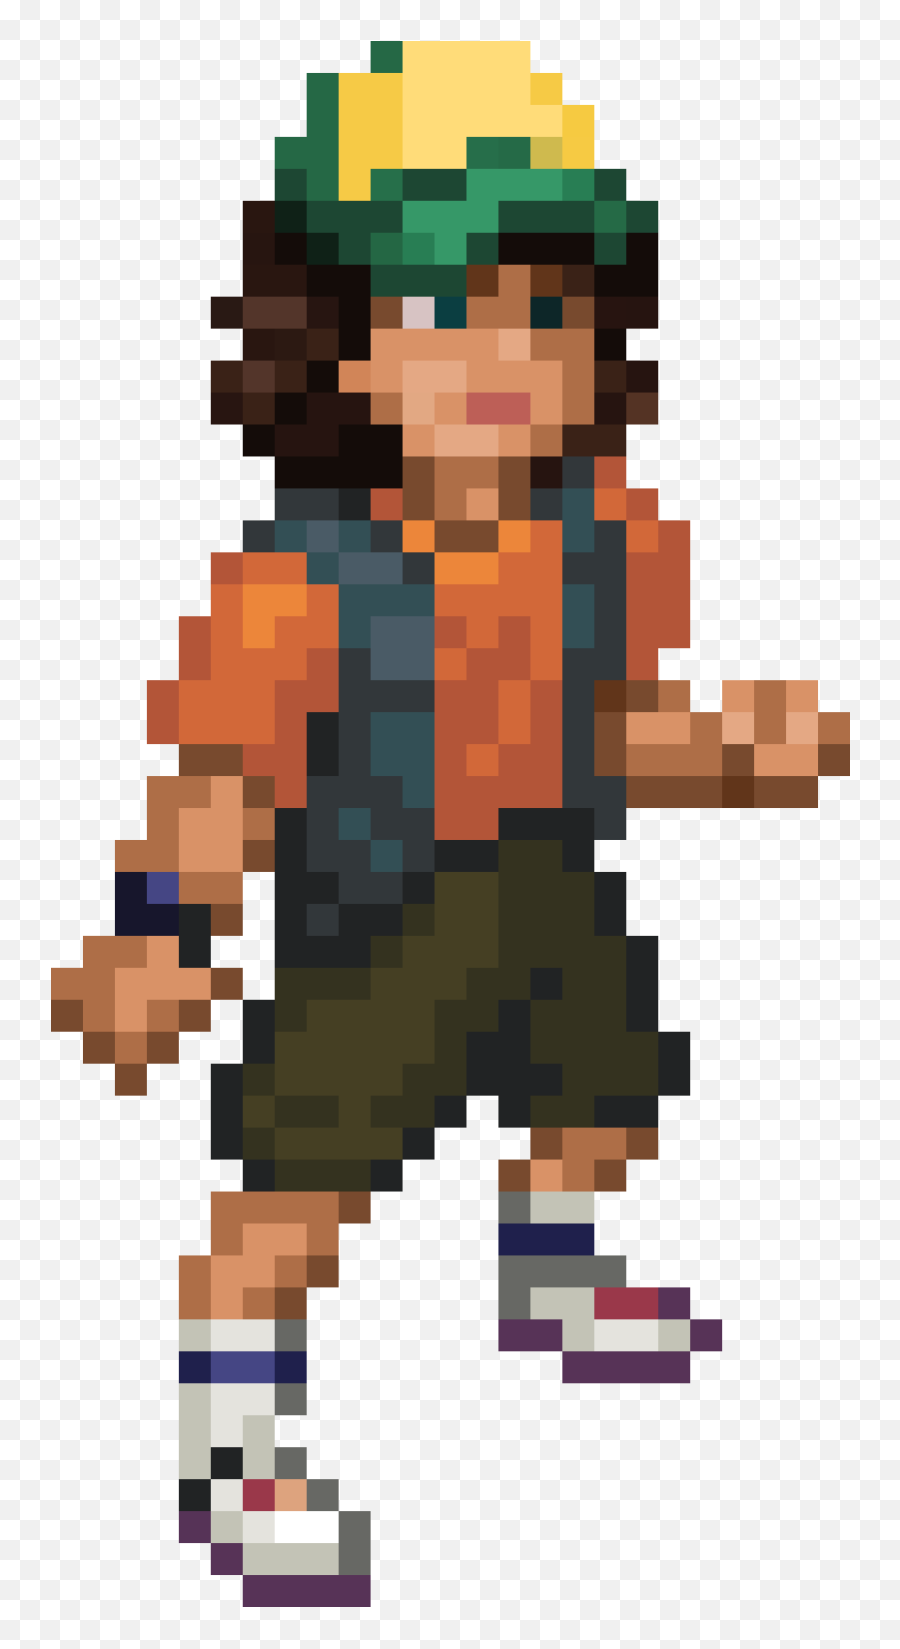 Stranger Things 3 The Game Screenshots And Art - Nintendo Dustin Stranger Things 3 The Game Emoji,Stranger Things Logo Transparent